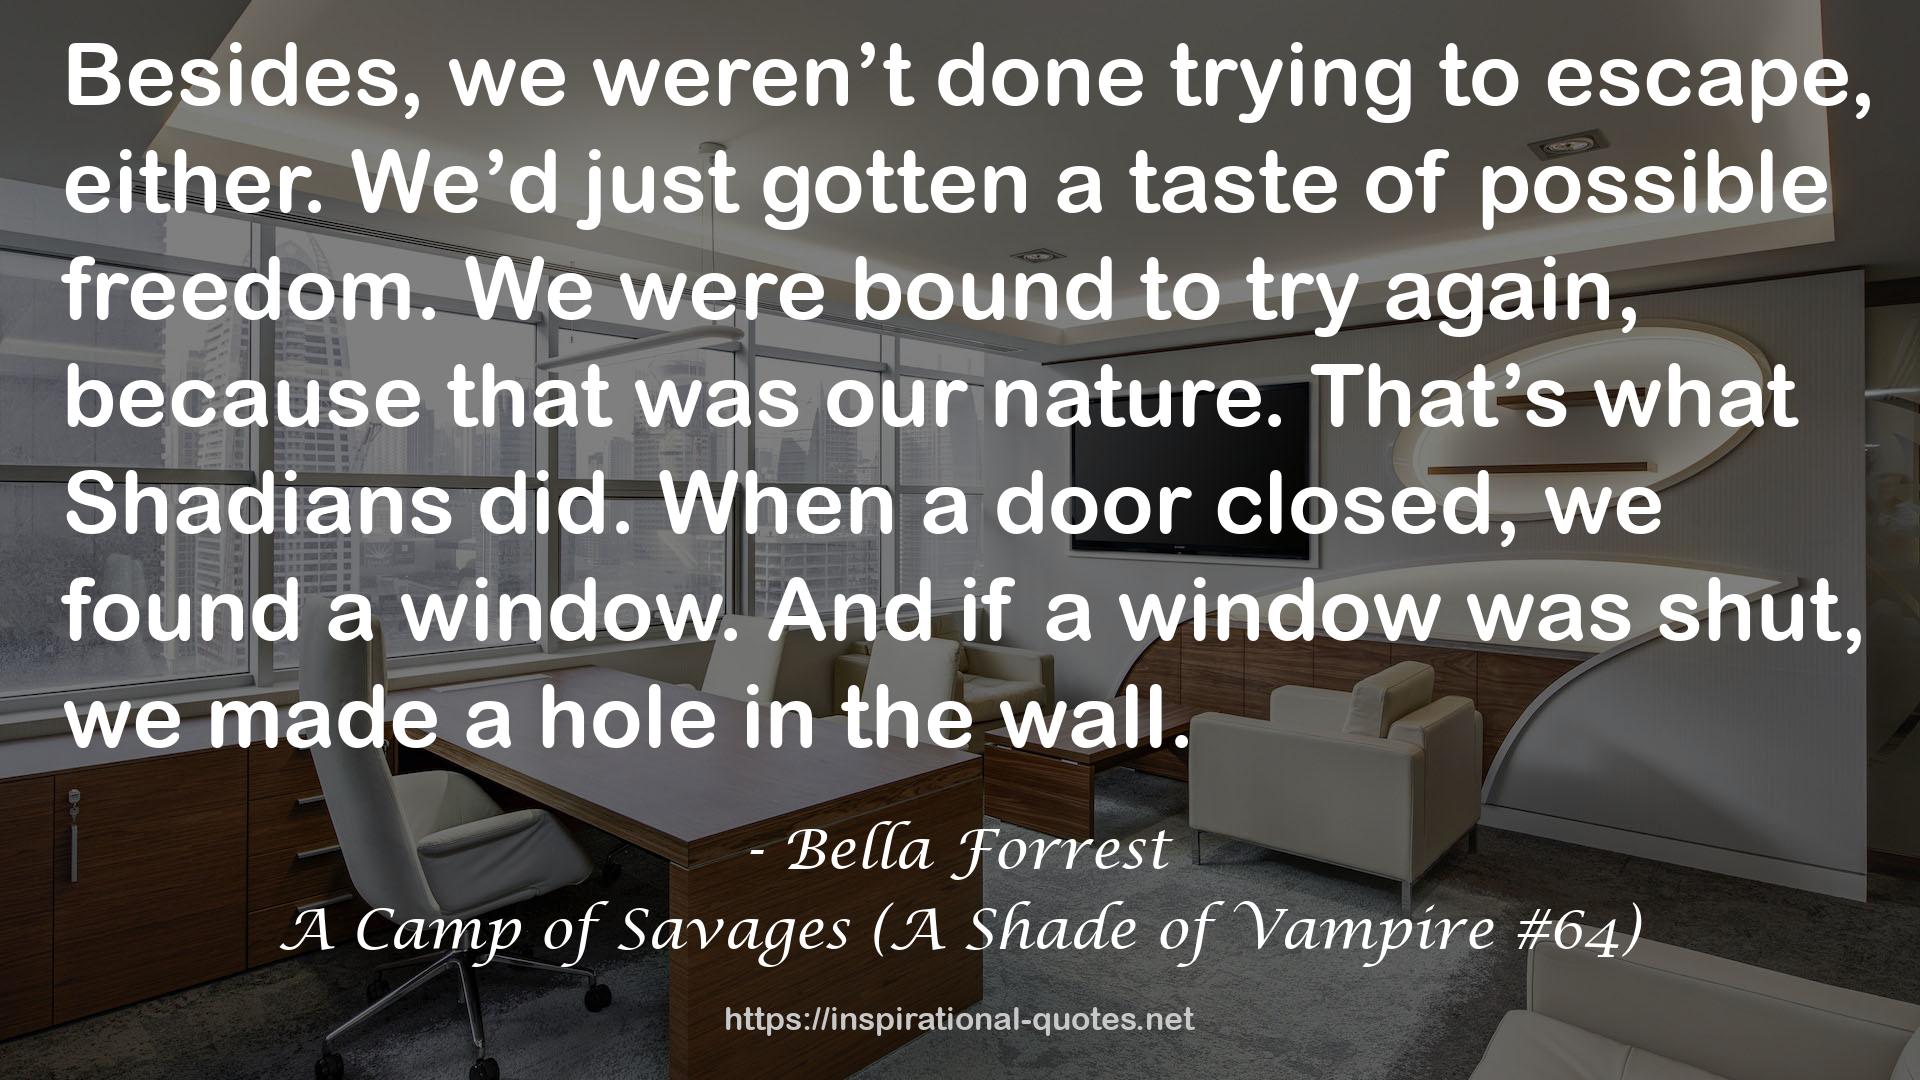 A Camp of Savages (A Shade of Vampire #64) QUOTES